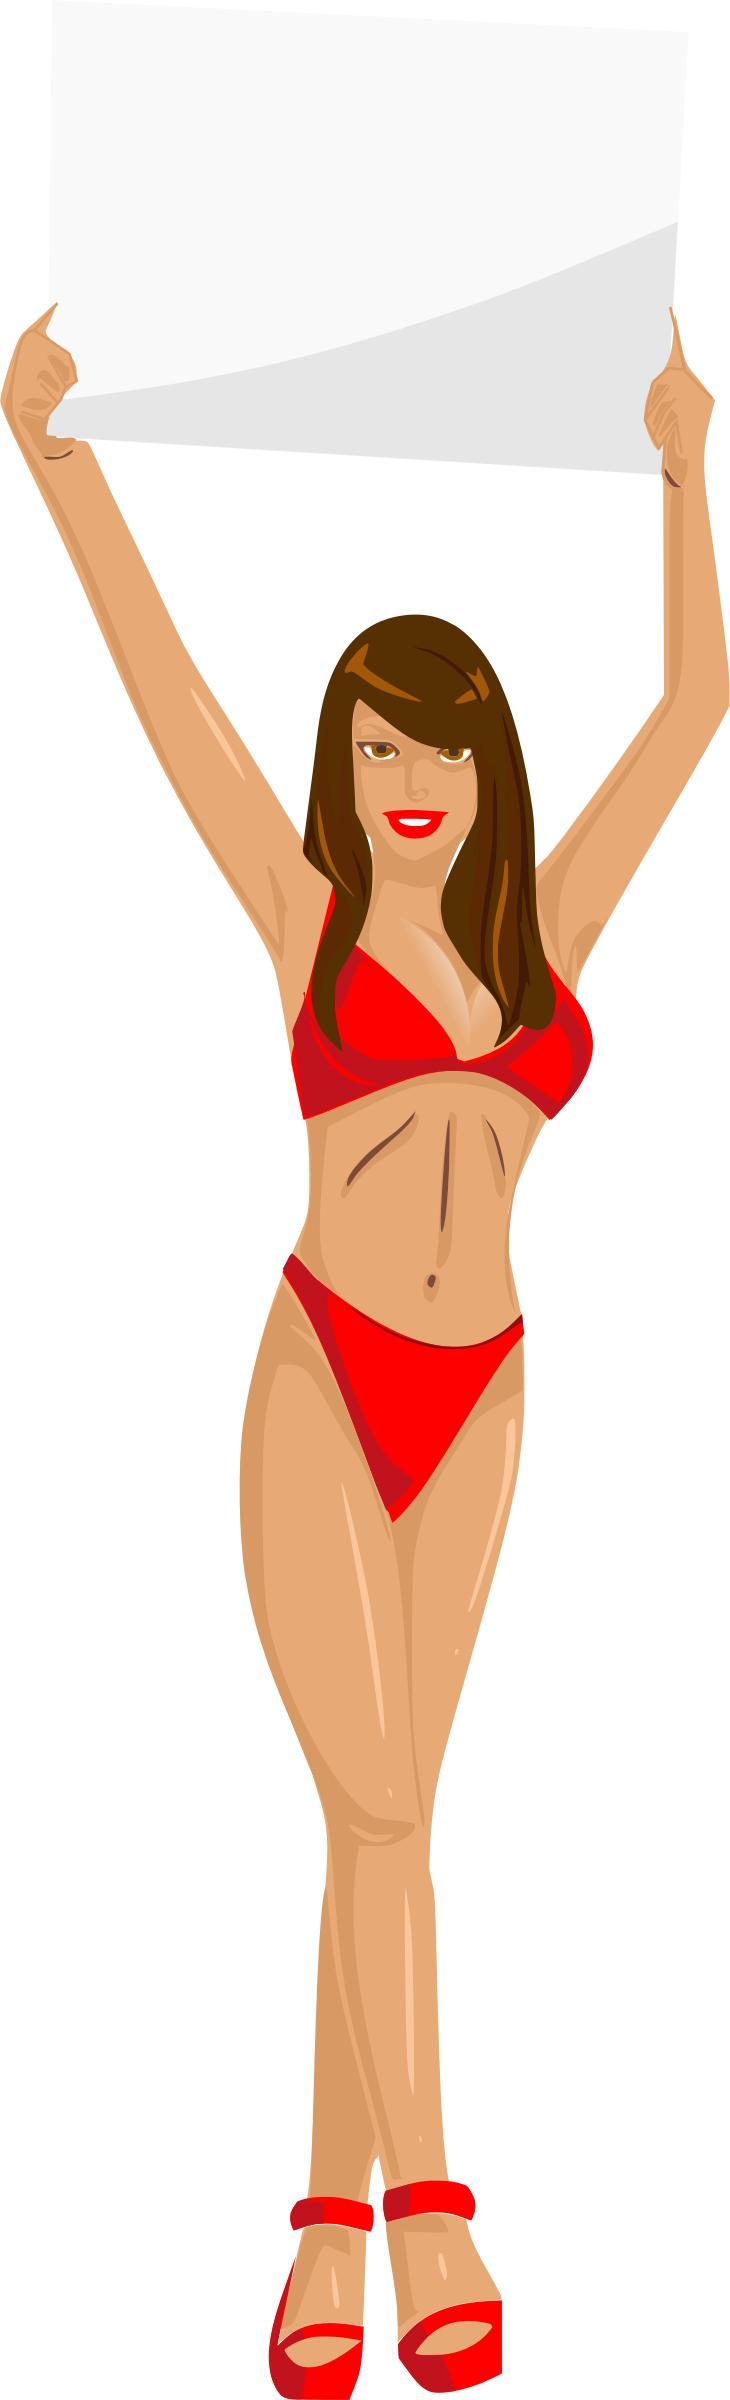 Girl with sign (red bikini, brown hair, light skin) png transparent